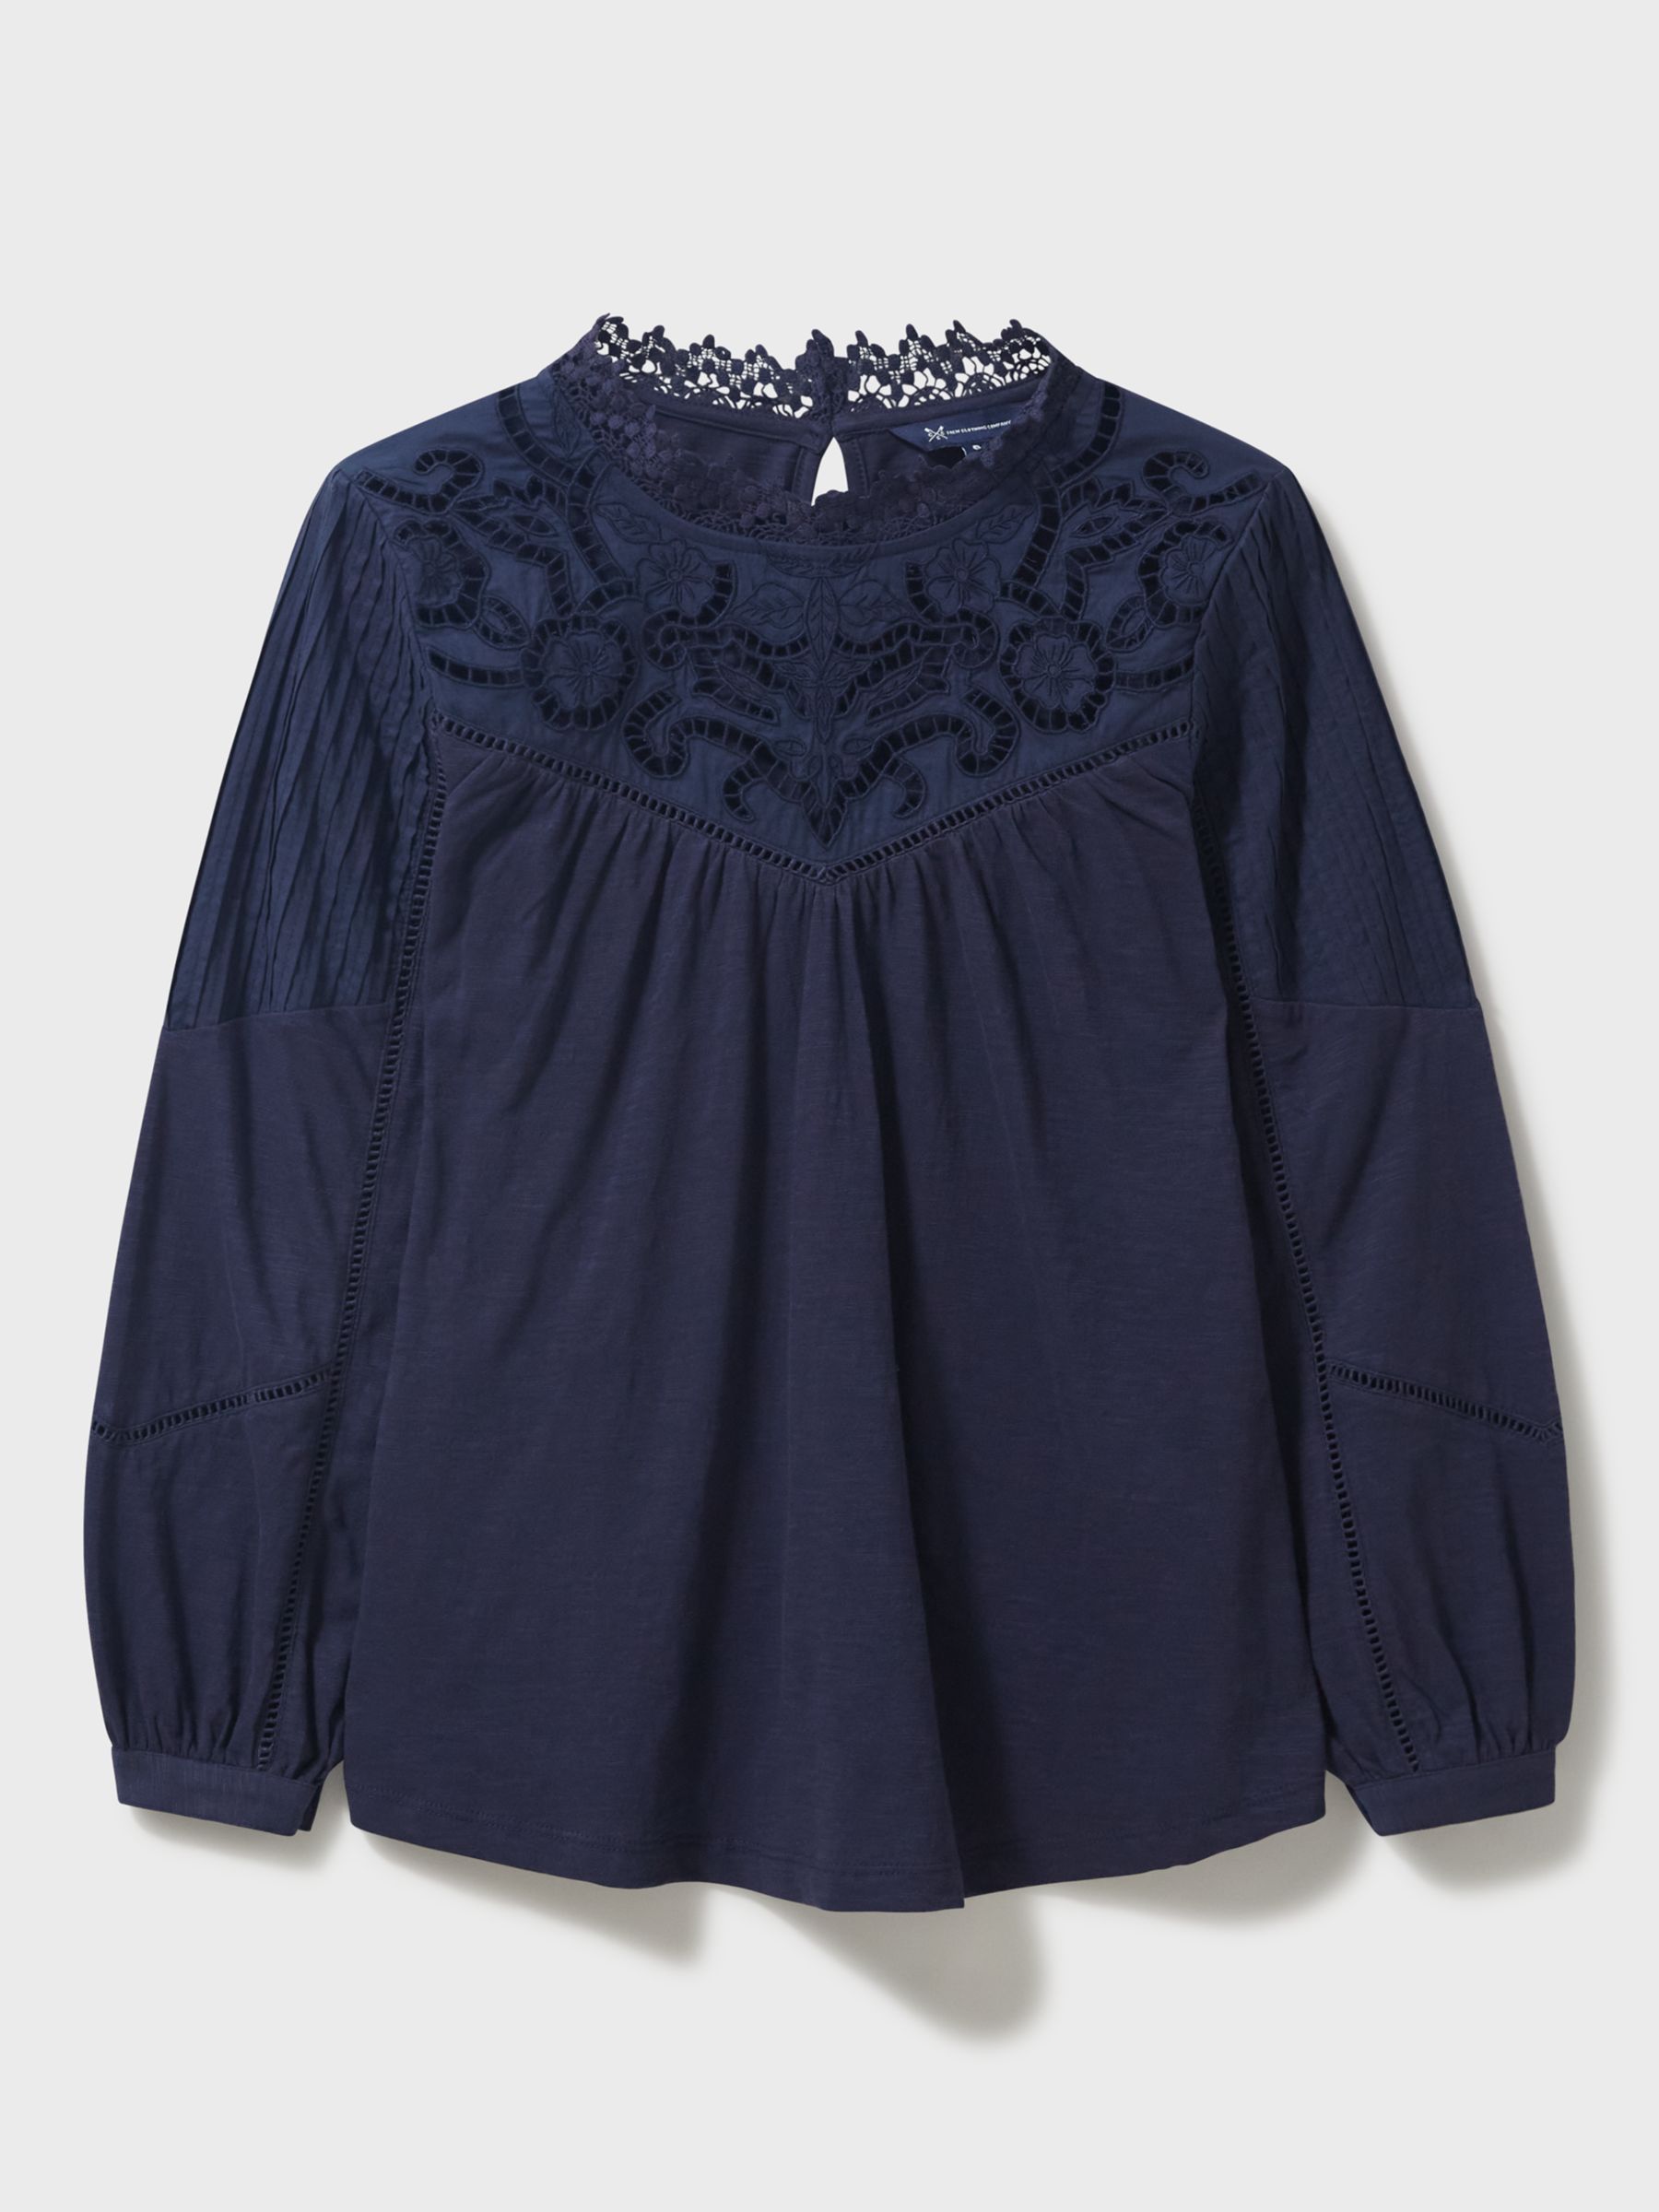 Crew Clothing Gabour Lace Top, Navy at John Lewis & Partners